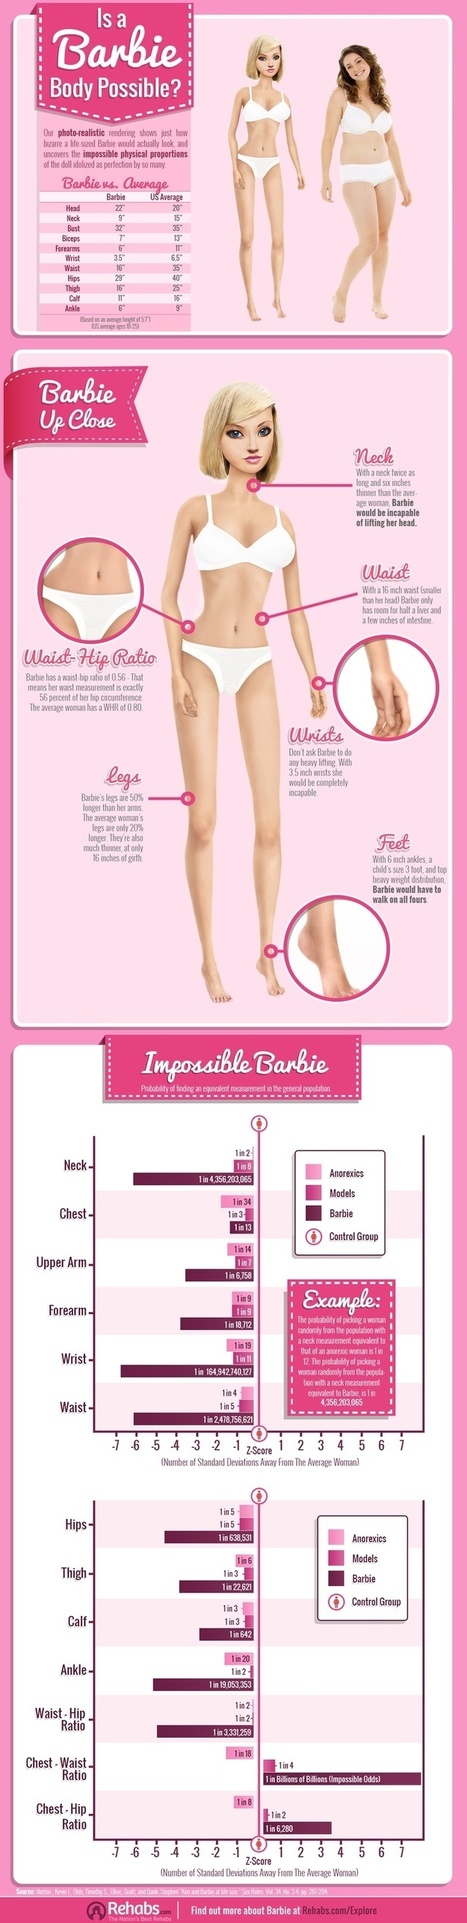 Is Barbie possible? | Anthropometry and Kinanthropometry | Scoop.it